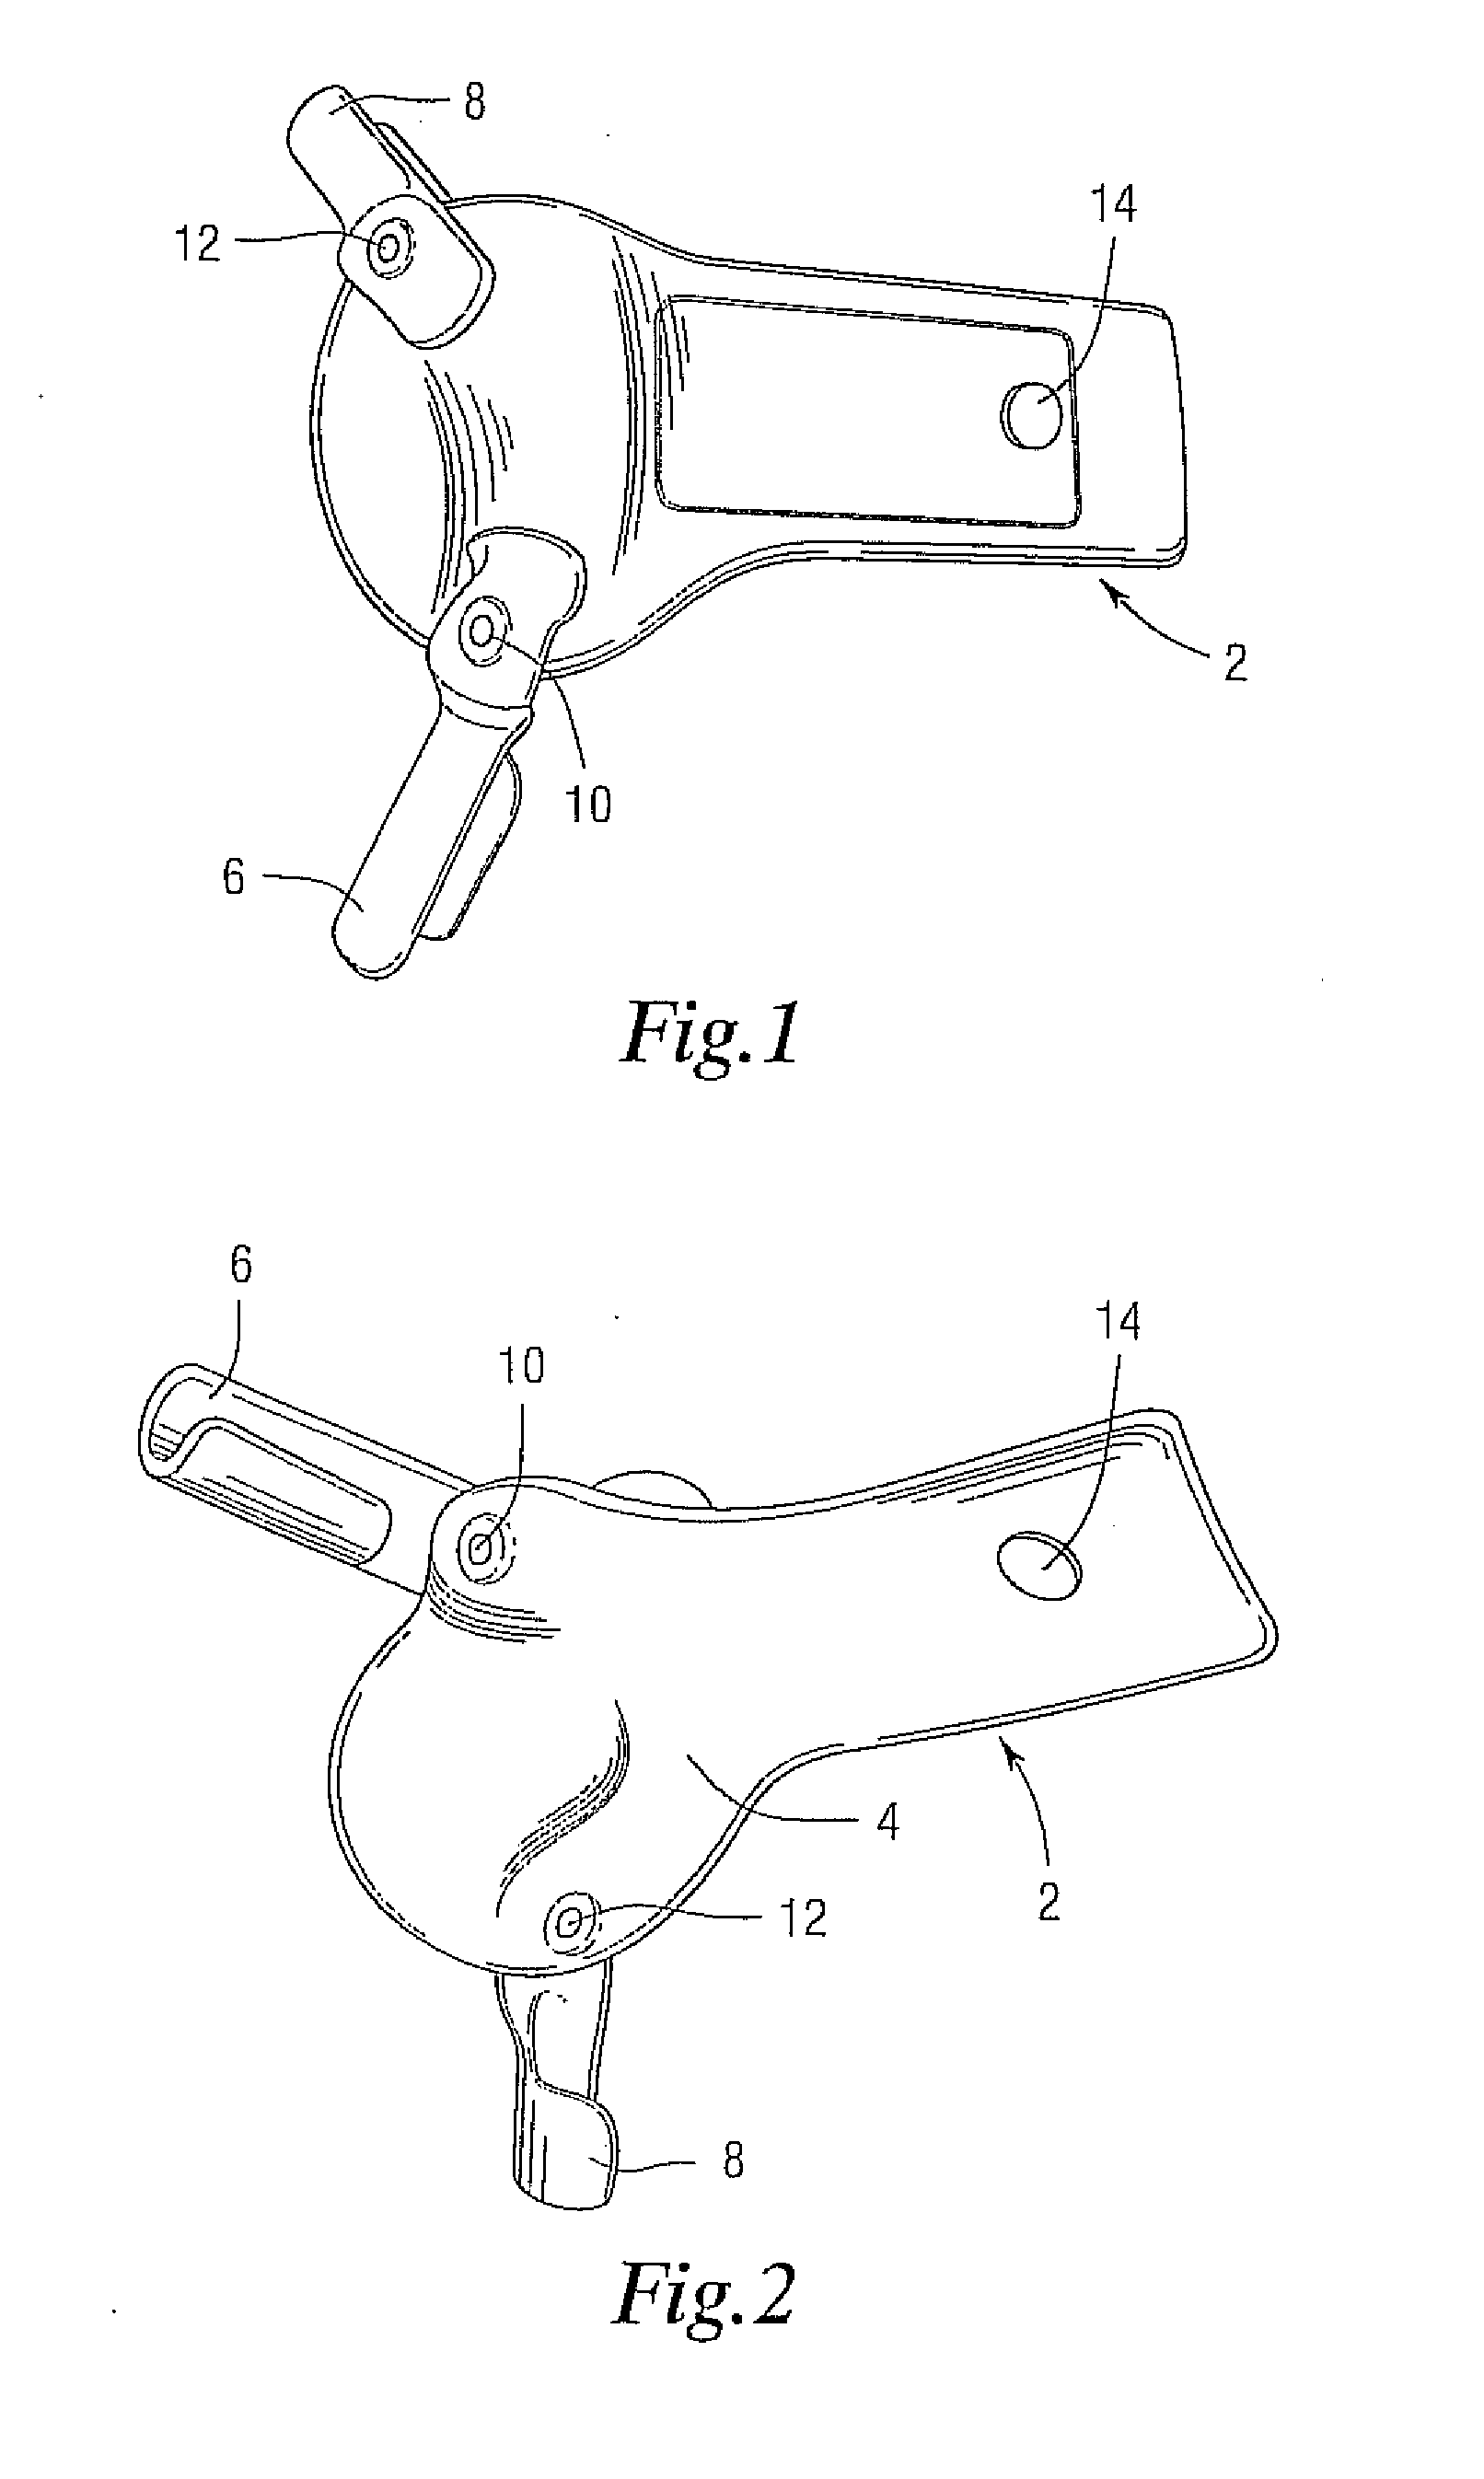 Method and Apparatus for Treating Carpal Tunnel Syndrome